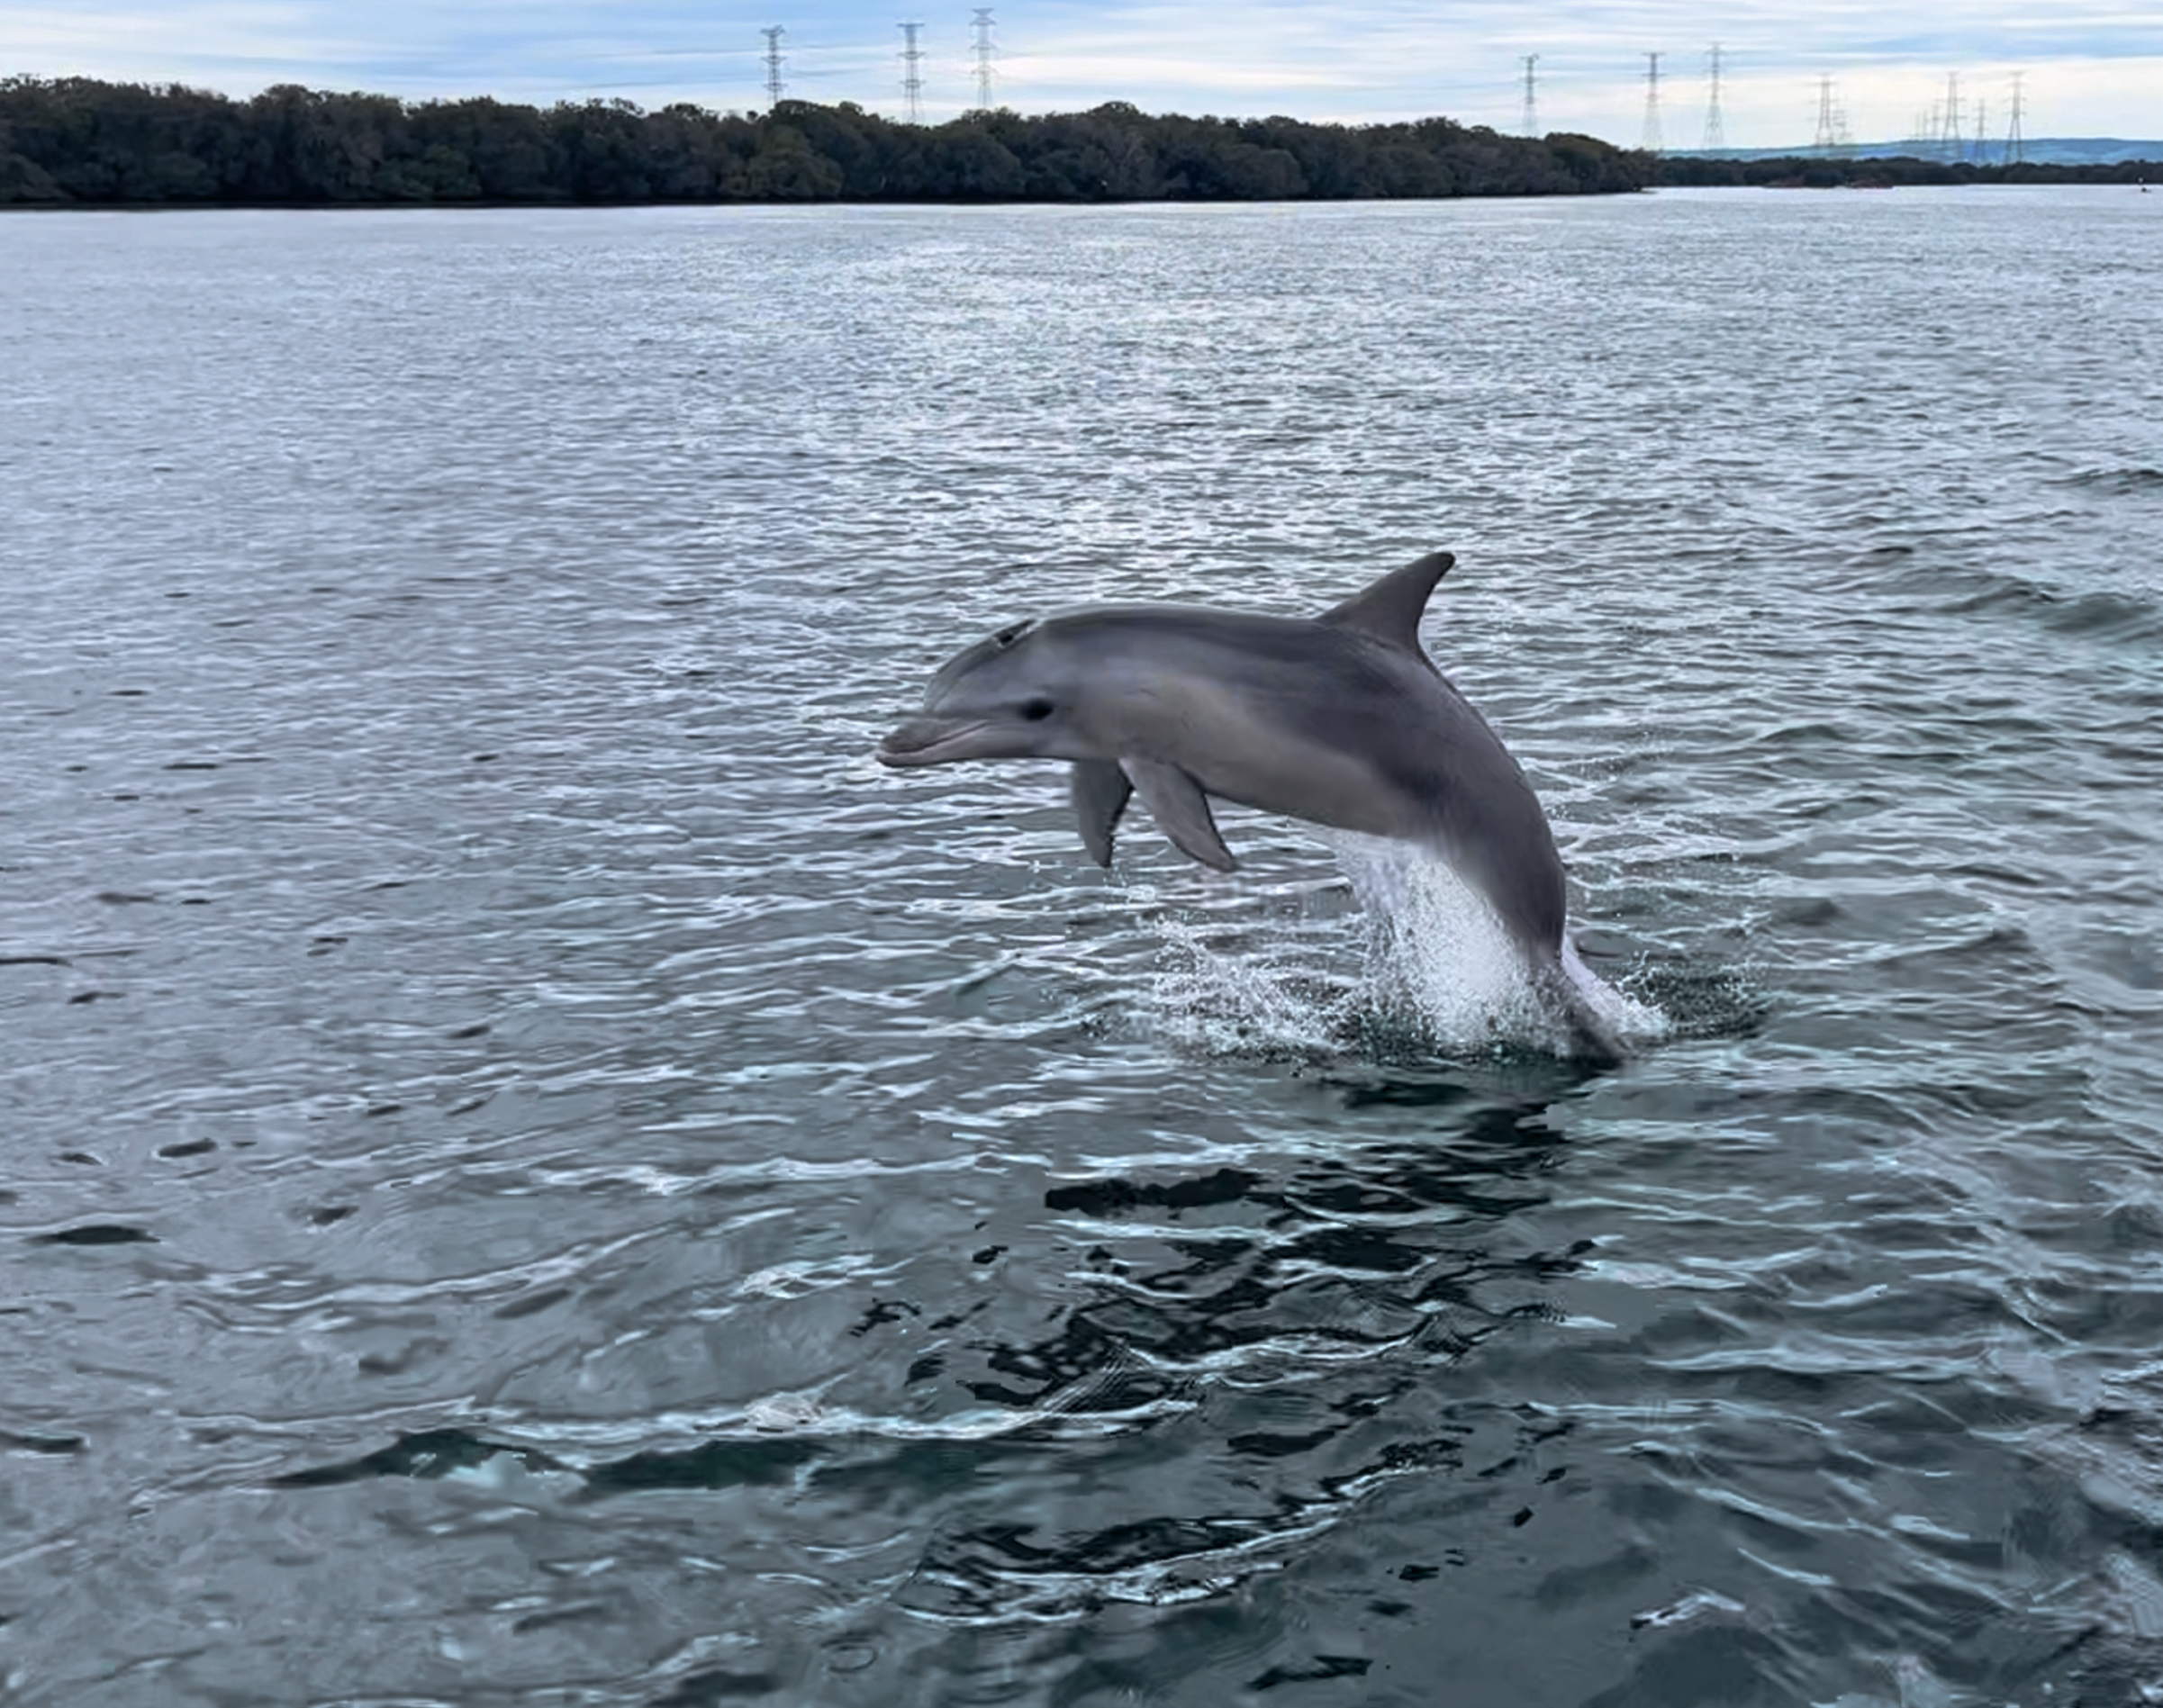 PRIVATE TOUR - 90-minute Dolphins and Ships Graveyard Tour